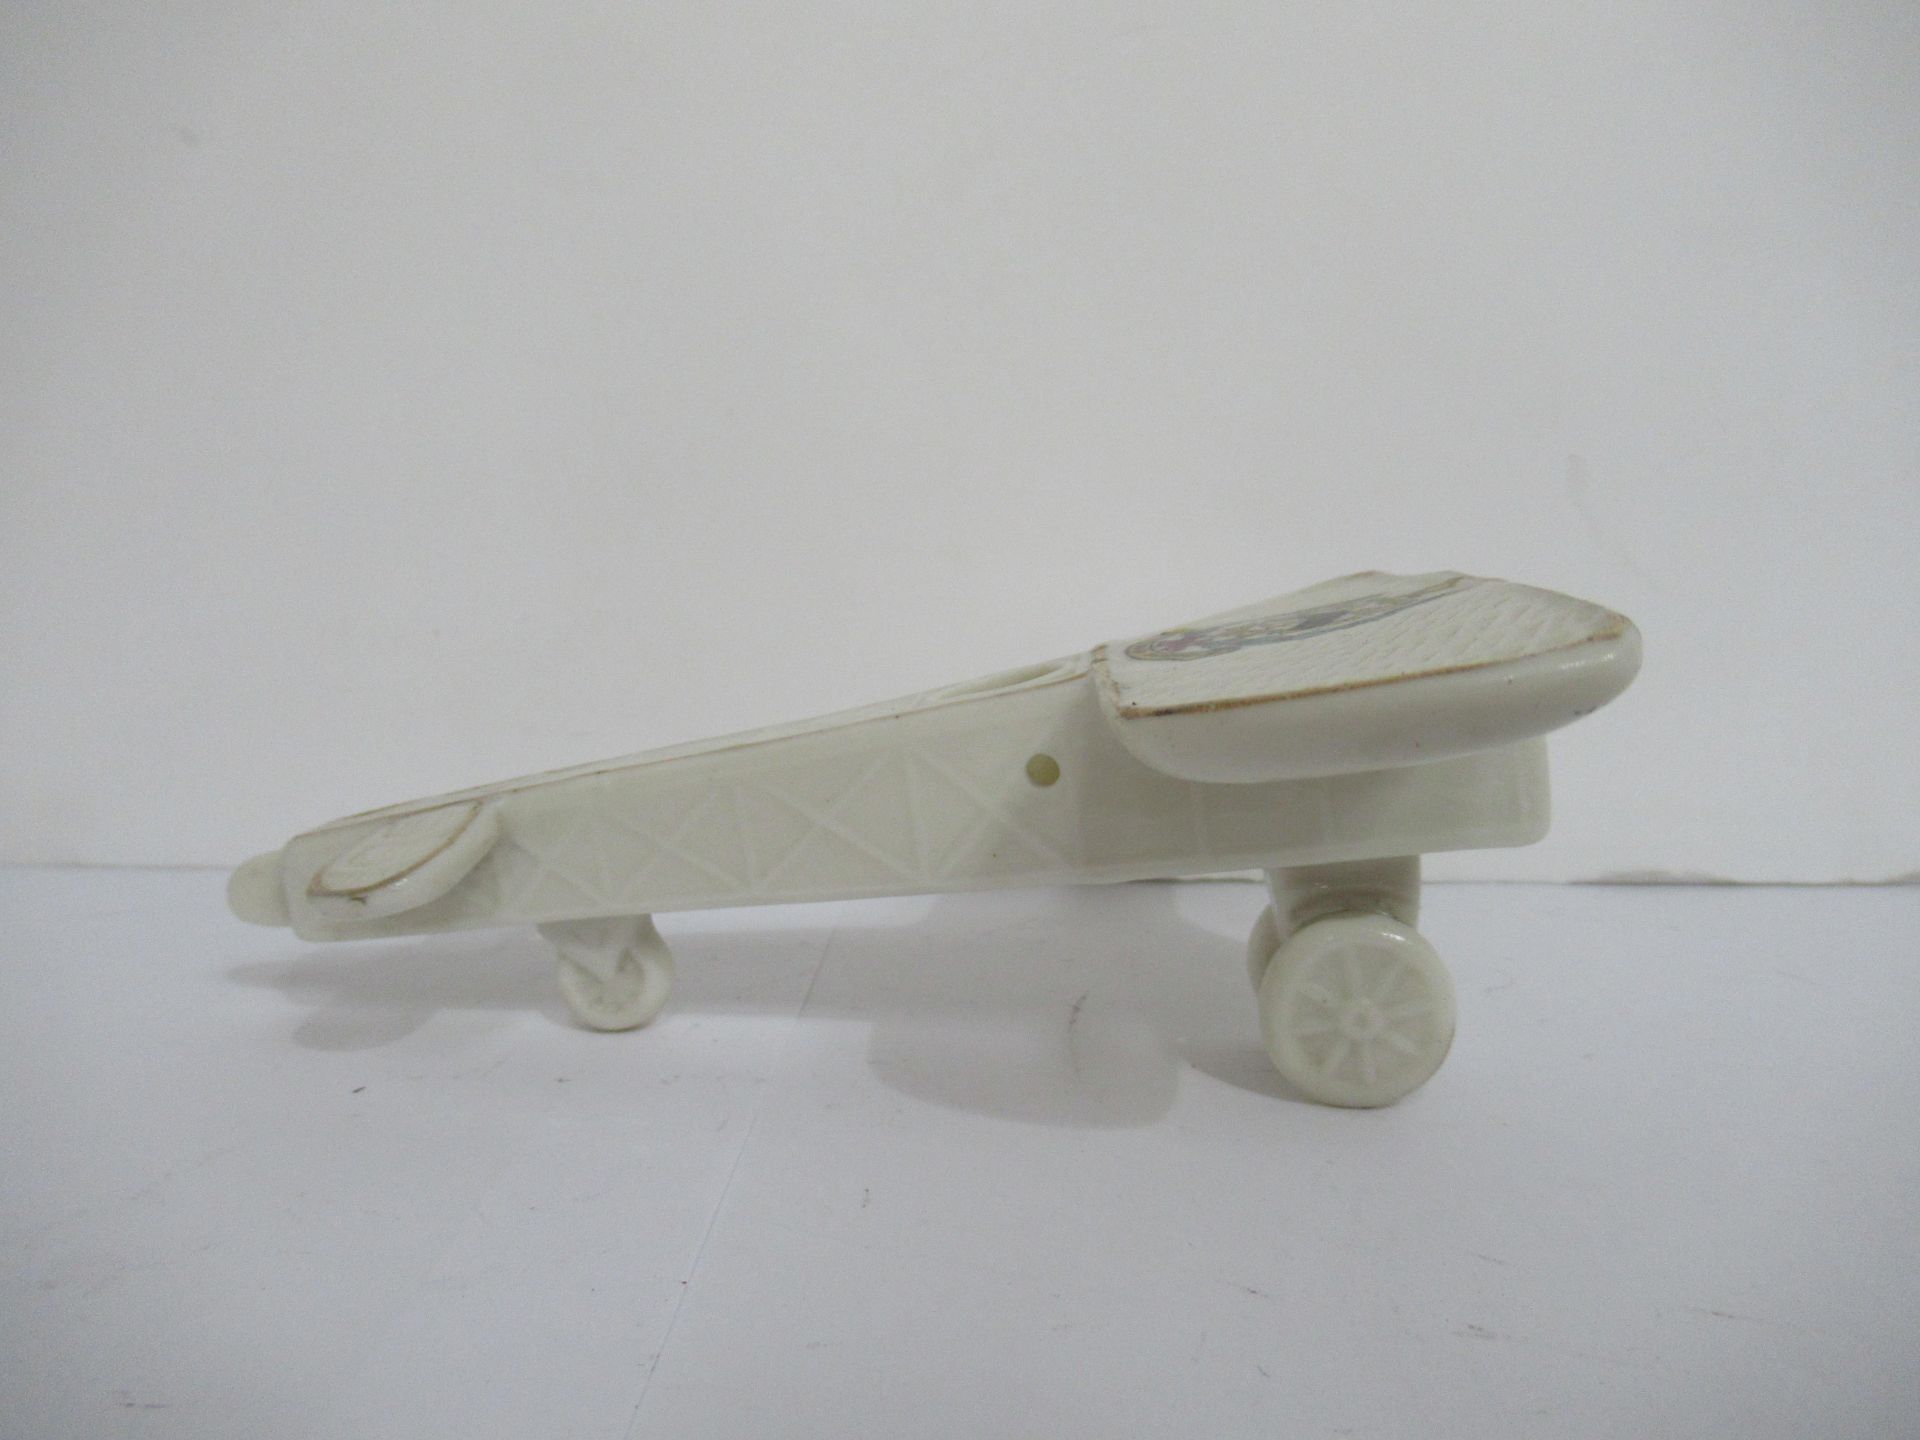 Crested china Clifton model of aeroplane with Grimsby coat of arms - Image 3 of 9